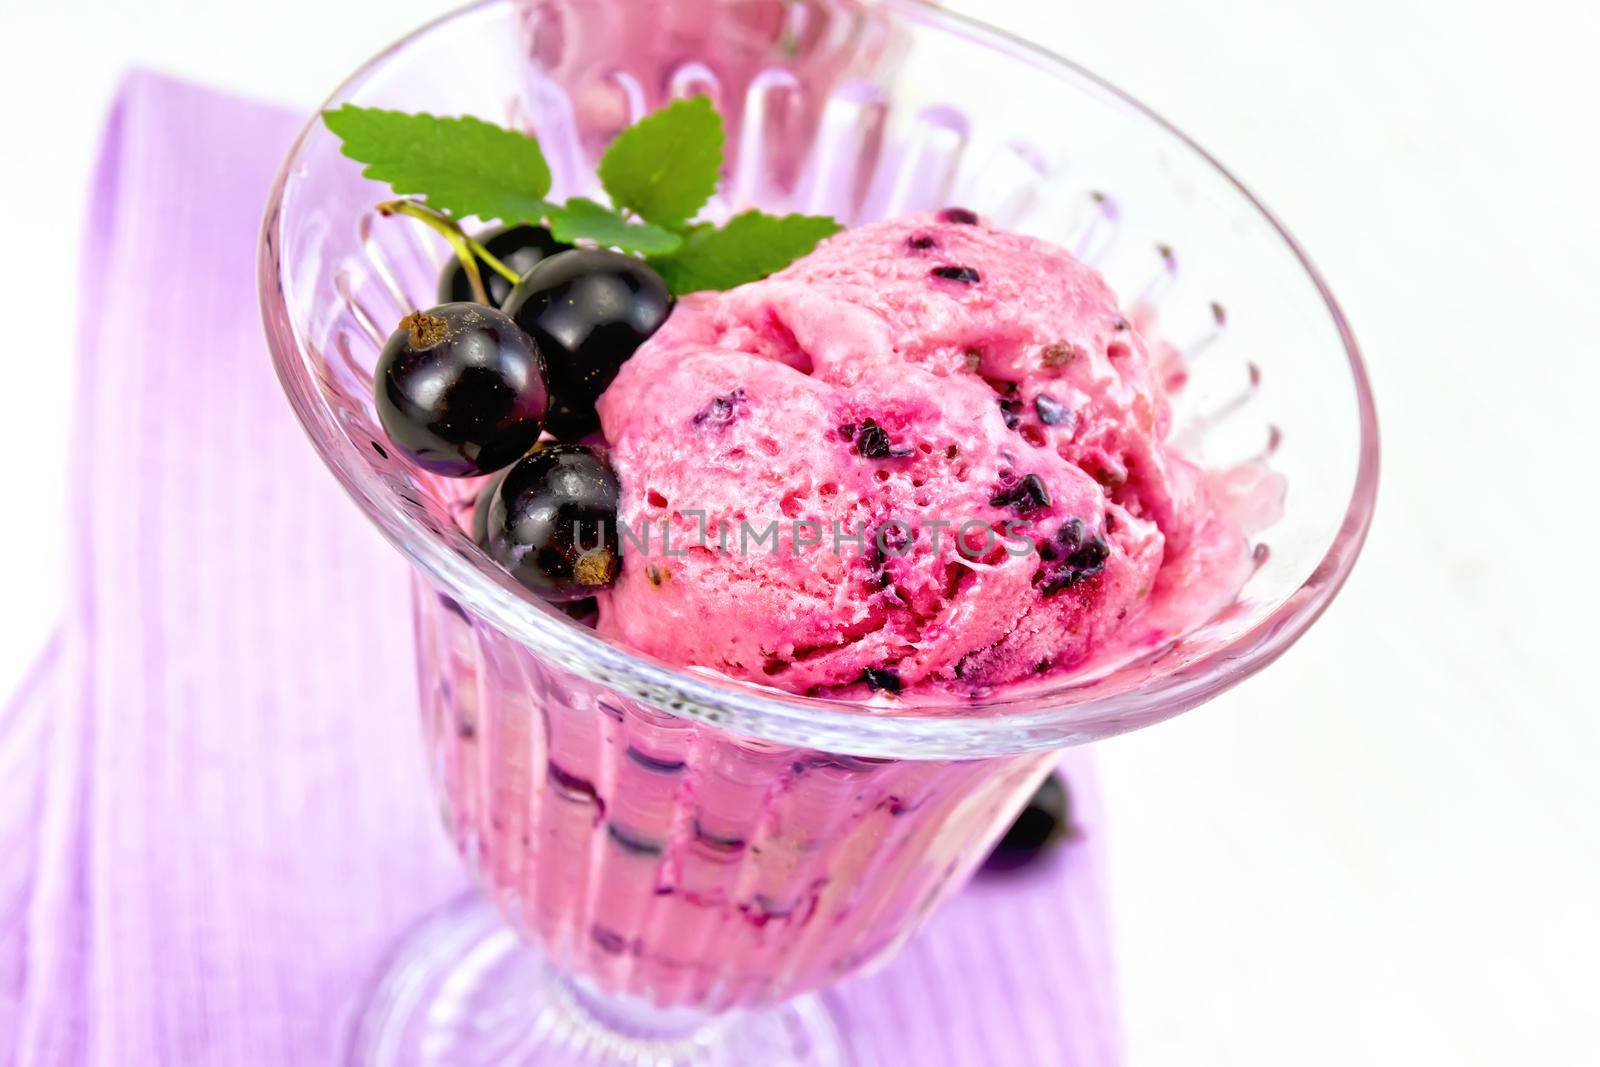 Ice cream with black currant on board by rezkrr